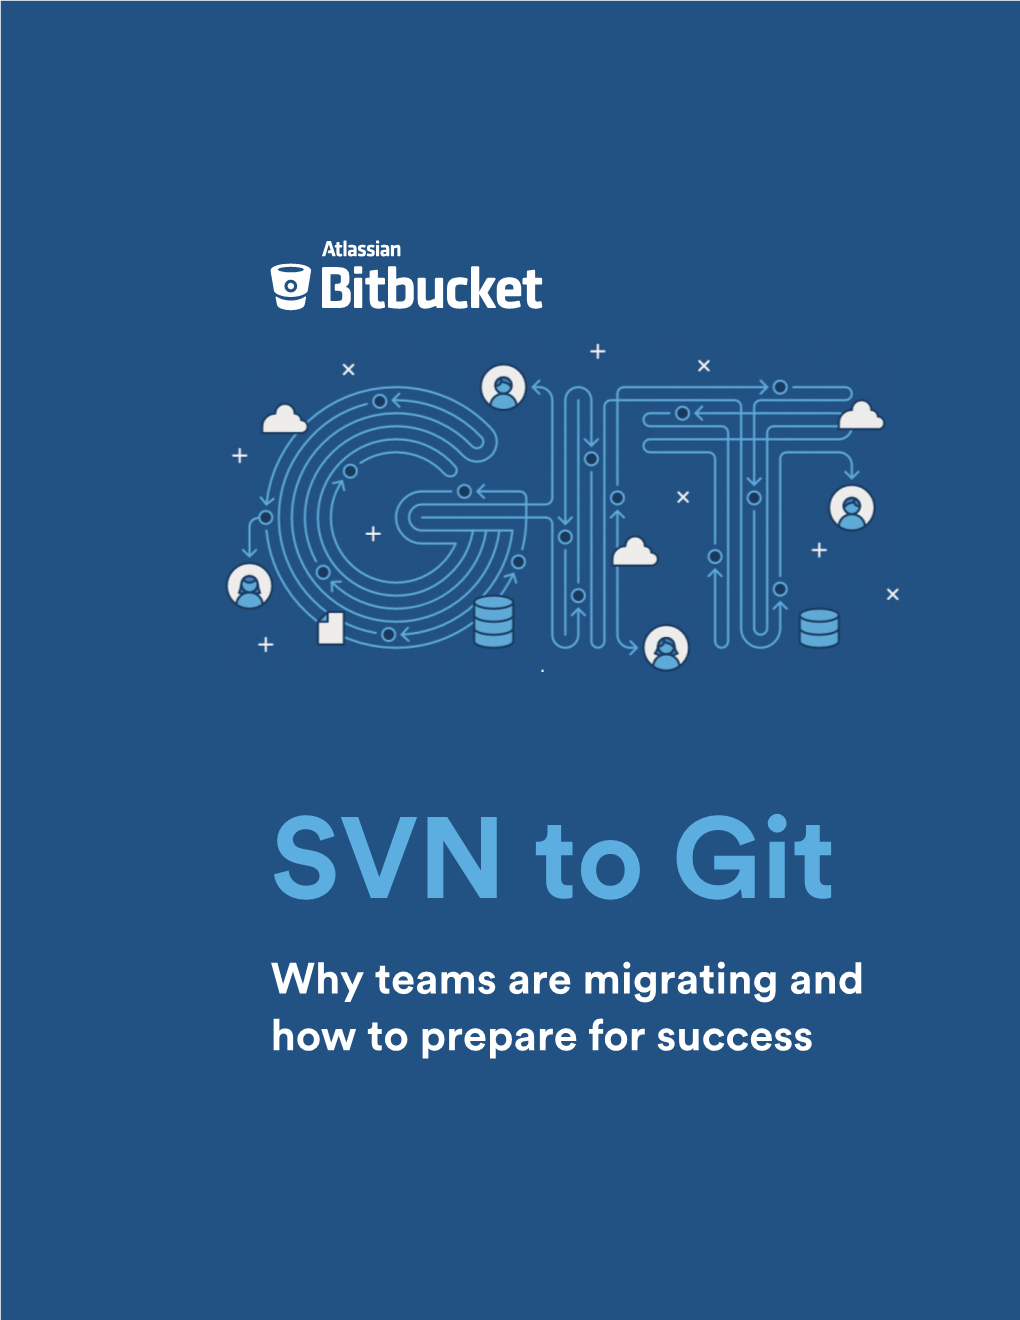 Why Teams Are Migrating and How to Prepare for Success Contents